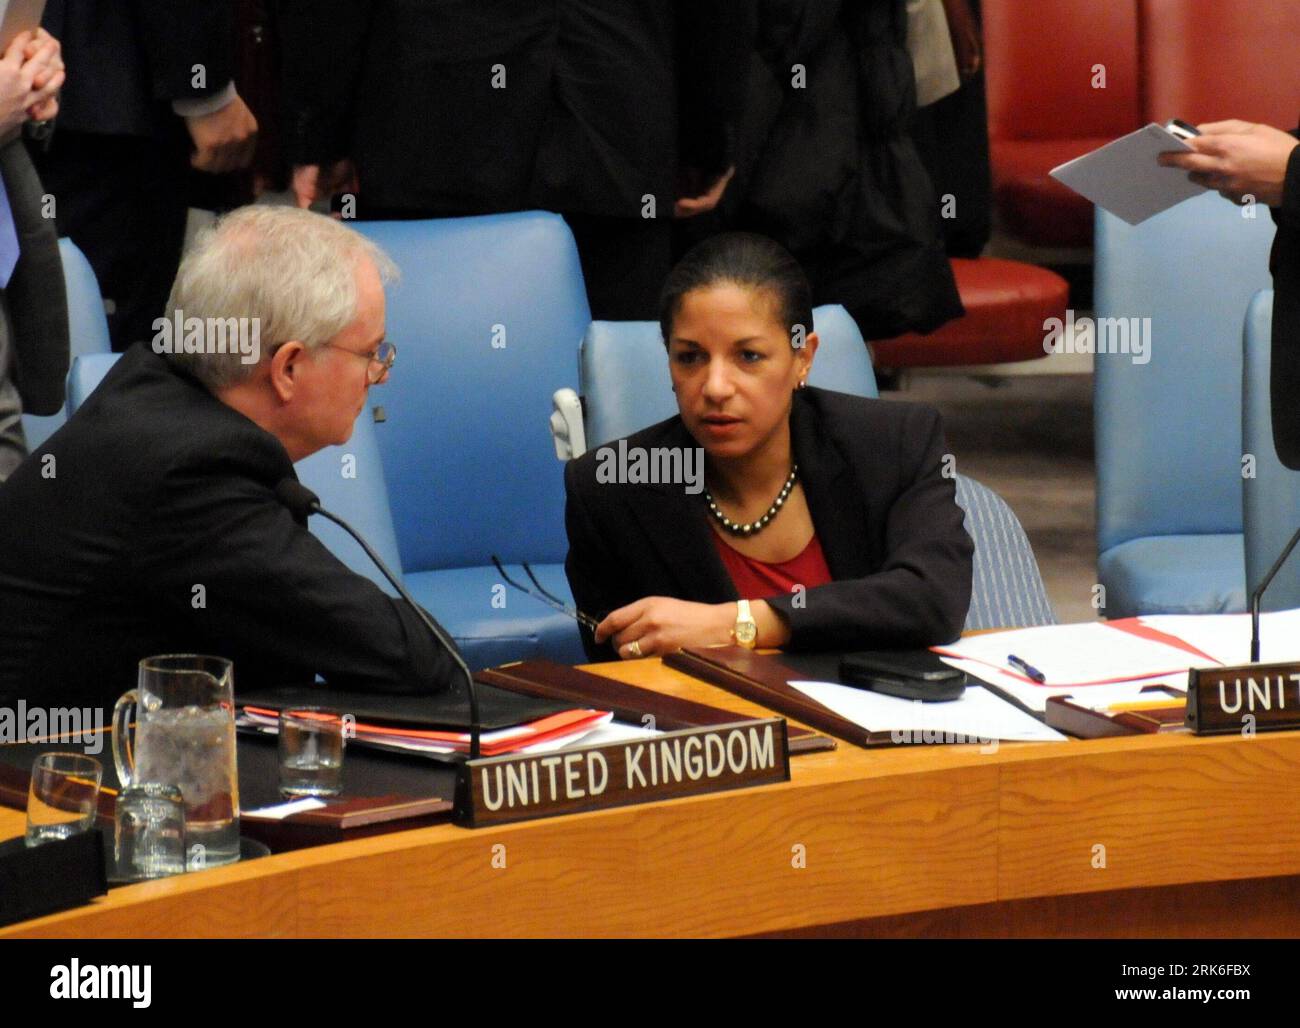 Bildnummer: 53836133  Datum: 04.03.2010  Copyright: imago/Xinhua (100305) -- NEW YORK, March 5, 2010 (Xinhua) -- United States Ambassador to the United Nations (UN) Susan Rice (R) talks with British Ambassador to the UN Mark Lyall Grant at the headquaters of the UN in New York, the United States, March 4, 2010. Rice denied on Thursday reports that a draft resolution on Iranian sanctions was circulating among members of the UN Security Council. (Xinhua/Bai Jie) (wh) US-POLITICS-UN-IRAN PUBLICATIONxNOTxINxCHN People Politik UN Sitzung kbdig xub 2010 quer premiumd    Bildnummer 53836133 Date 04 0 Stock Photo